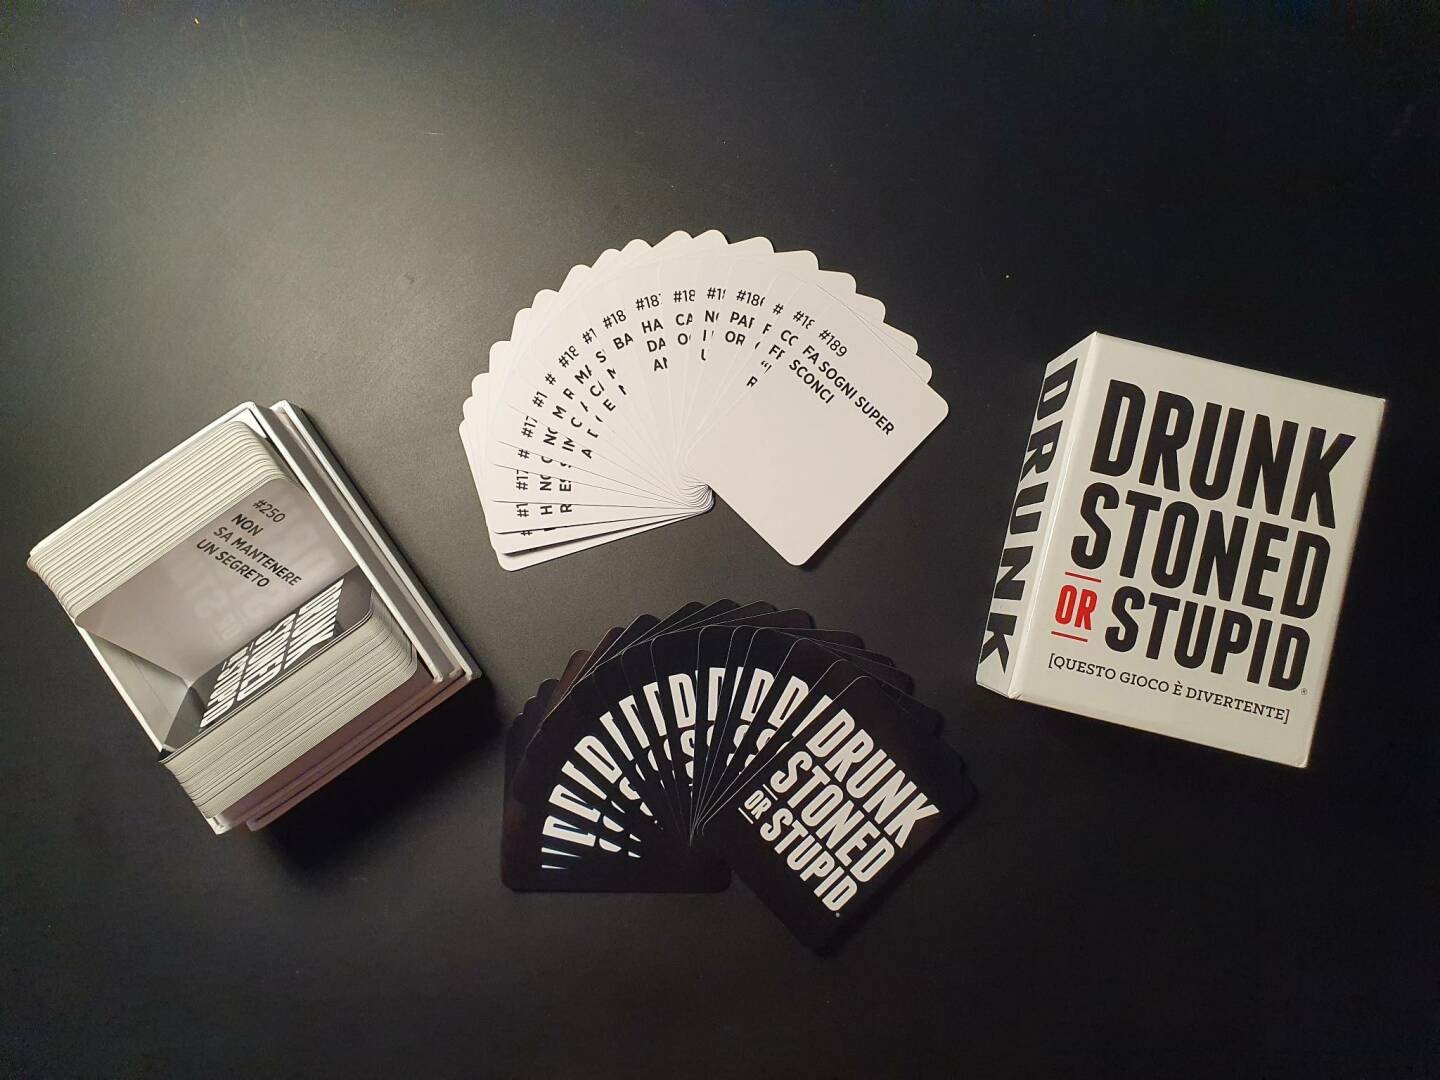 DRUNK STONED or STUPID - Recensione - Tom's Hardware